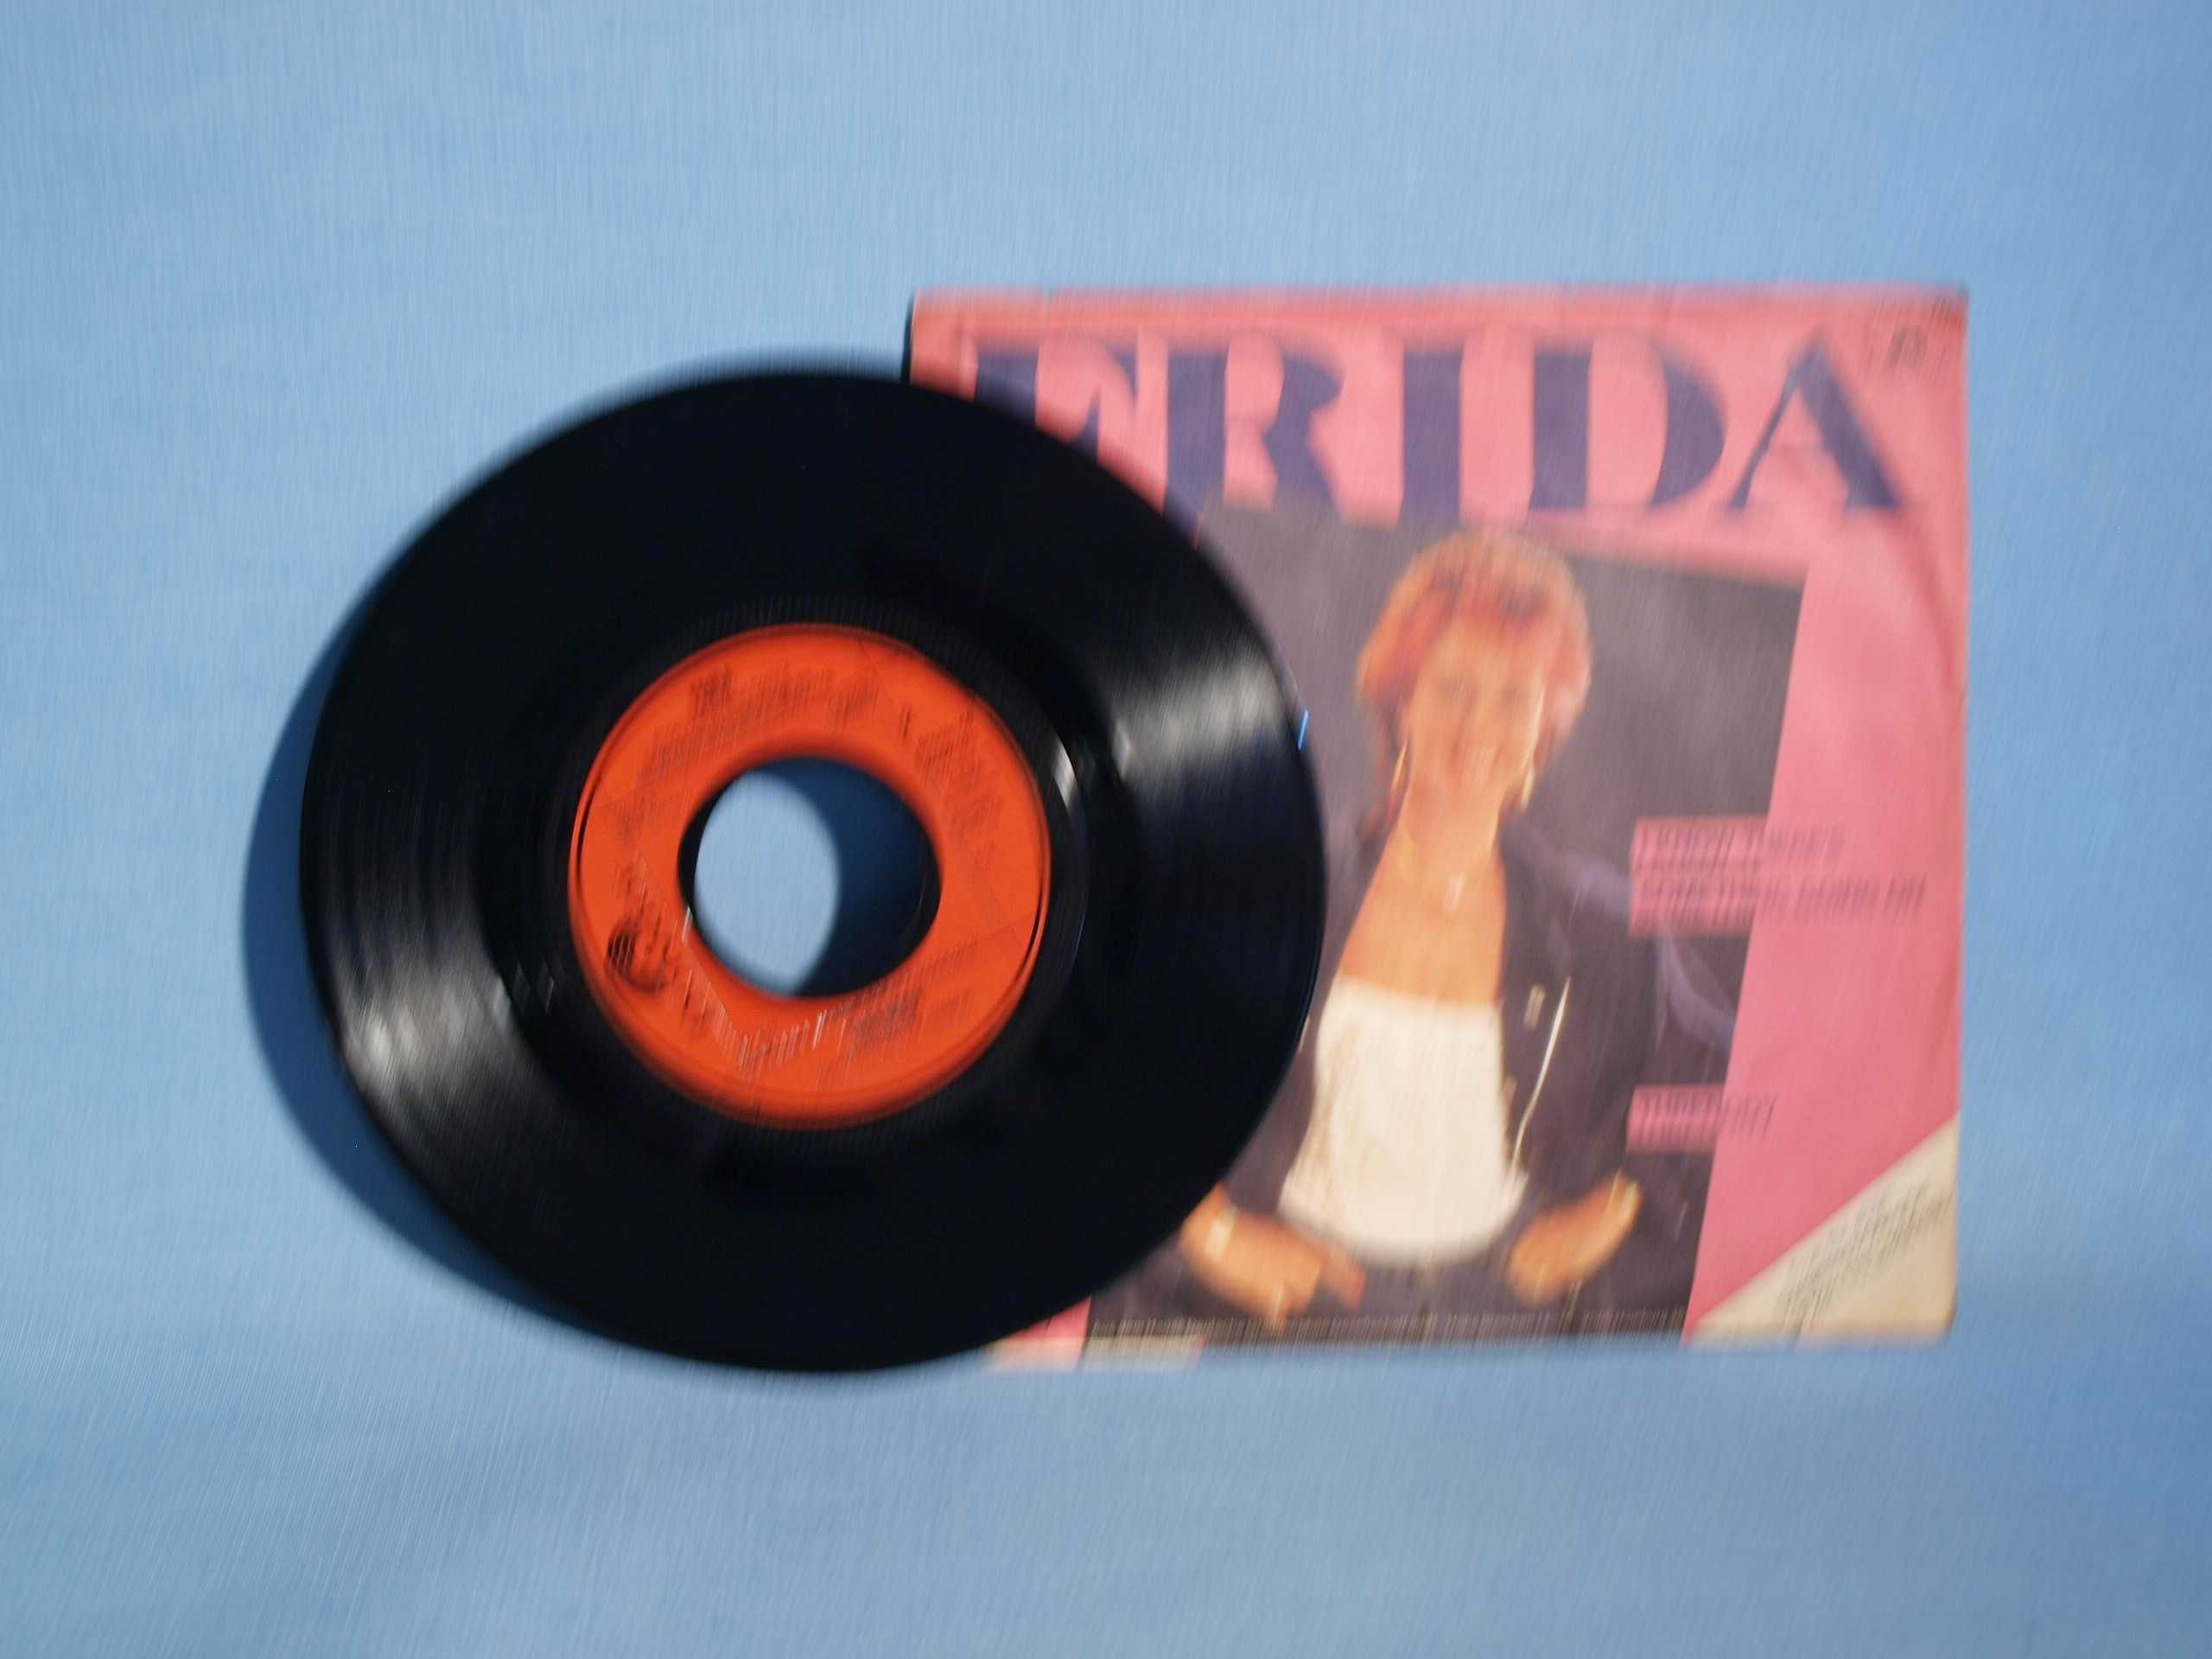 FRIDA From the album "Something's Going On" - SP vinyl 45 Polydor